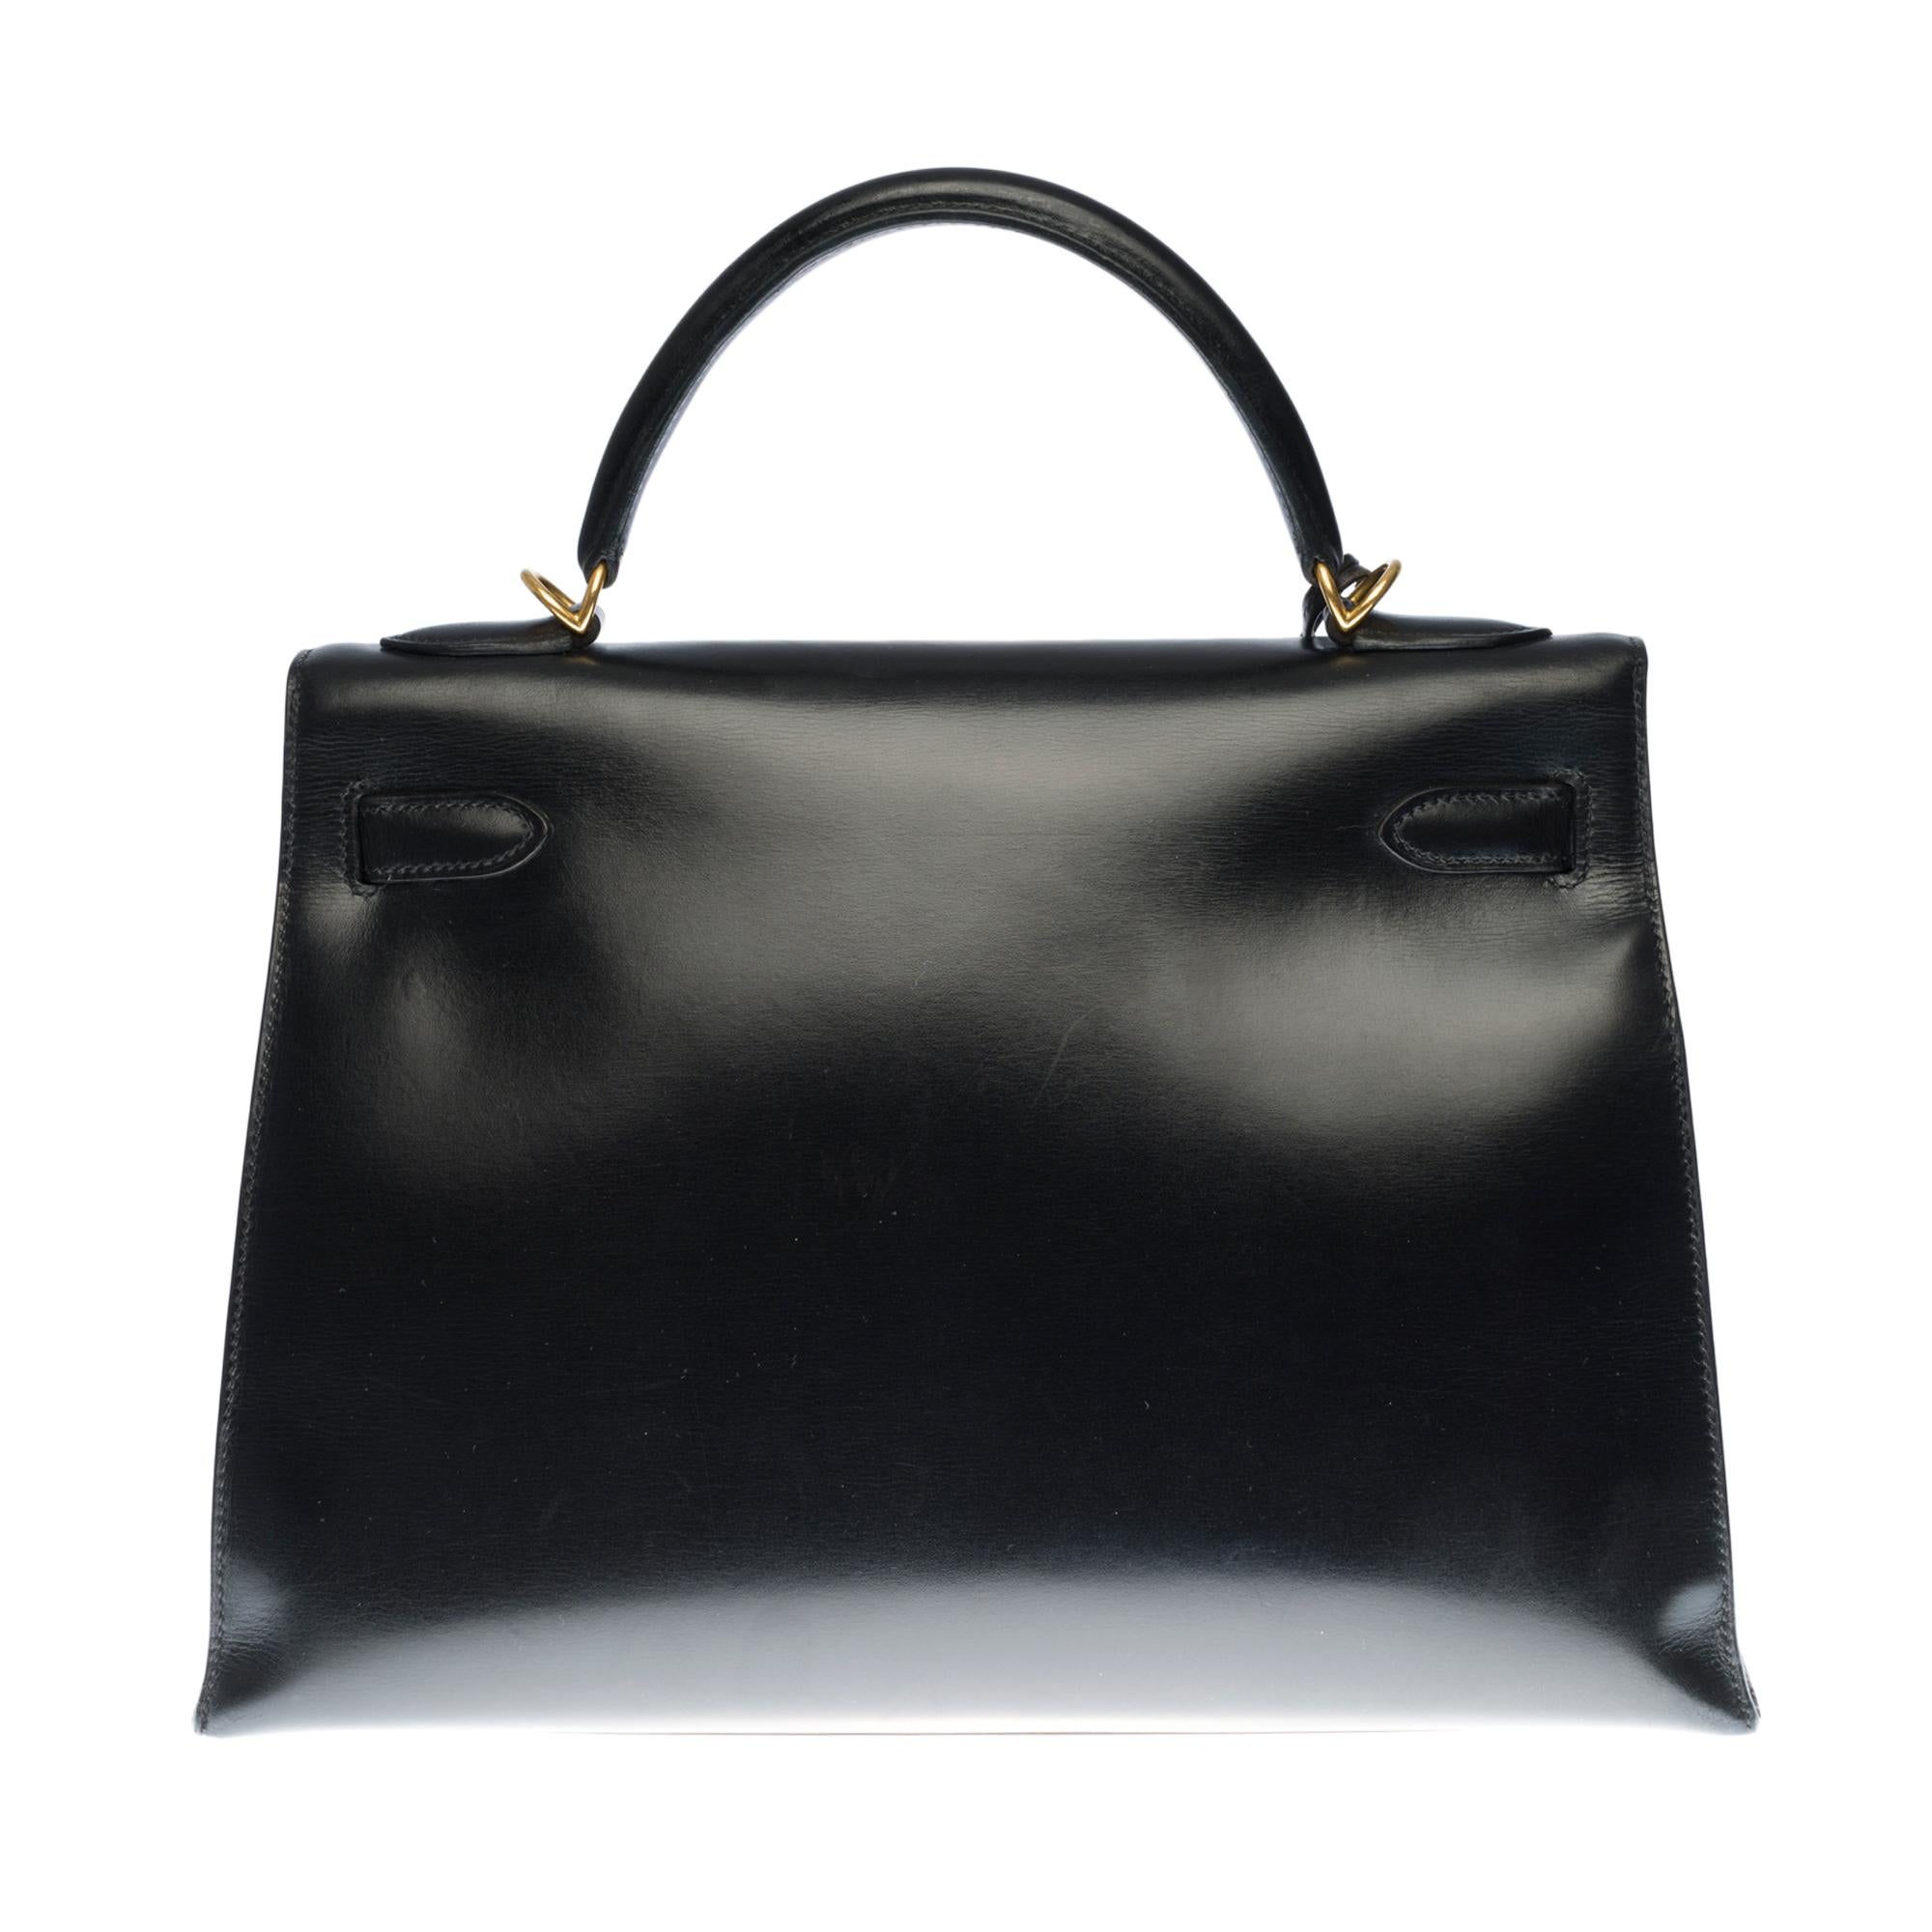 Rare & Exceptional Hermes Kelly 32 sellier handbag with shoulder strap in black box leather, gold plated metal hardware, simple handle in black box leather , a removable shoulder strap handle in black box leather allowing a hand or shoulder